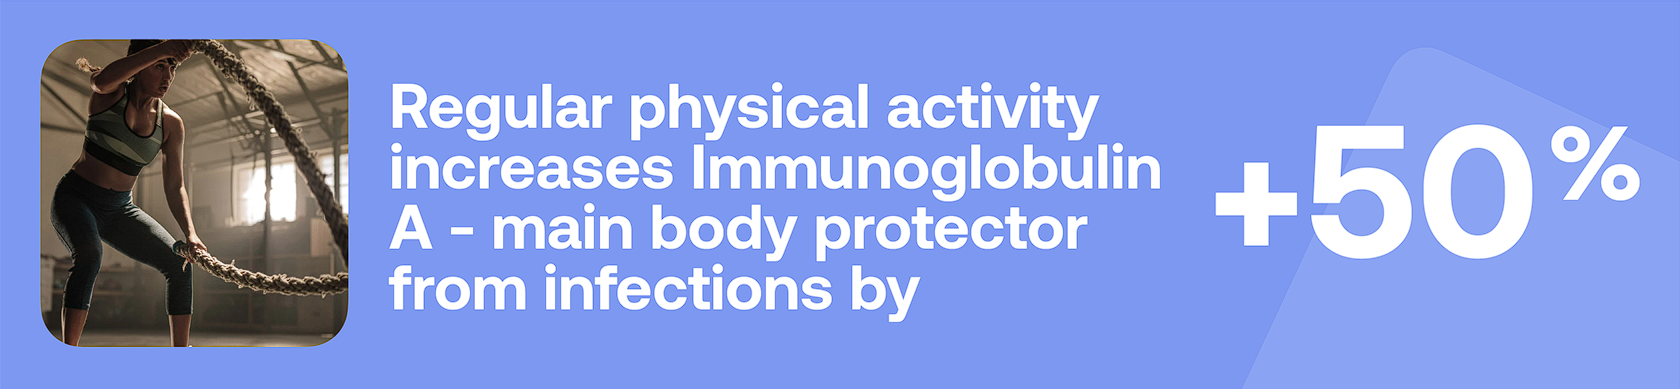 Regular physical activity increases immunoglobulin A - main body protector from infections by +50%